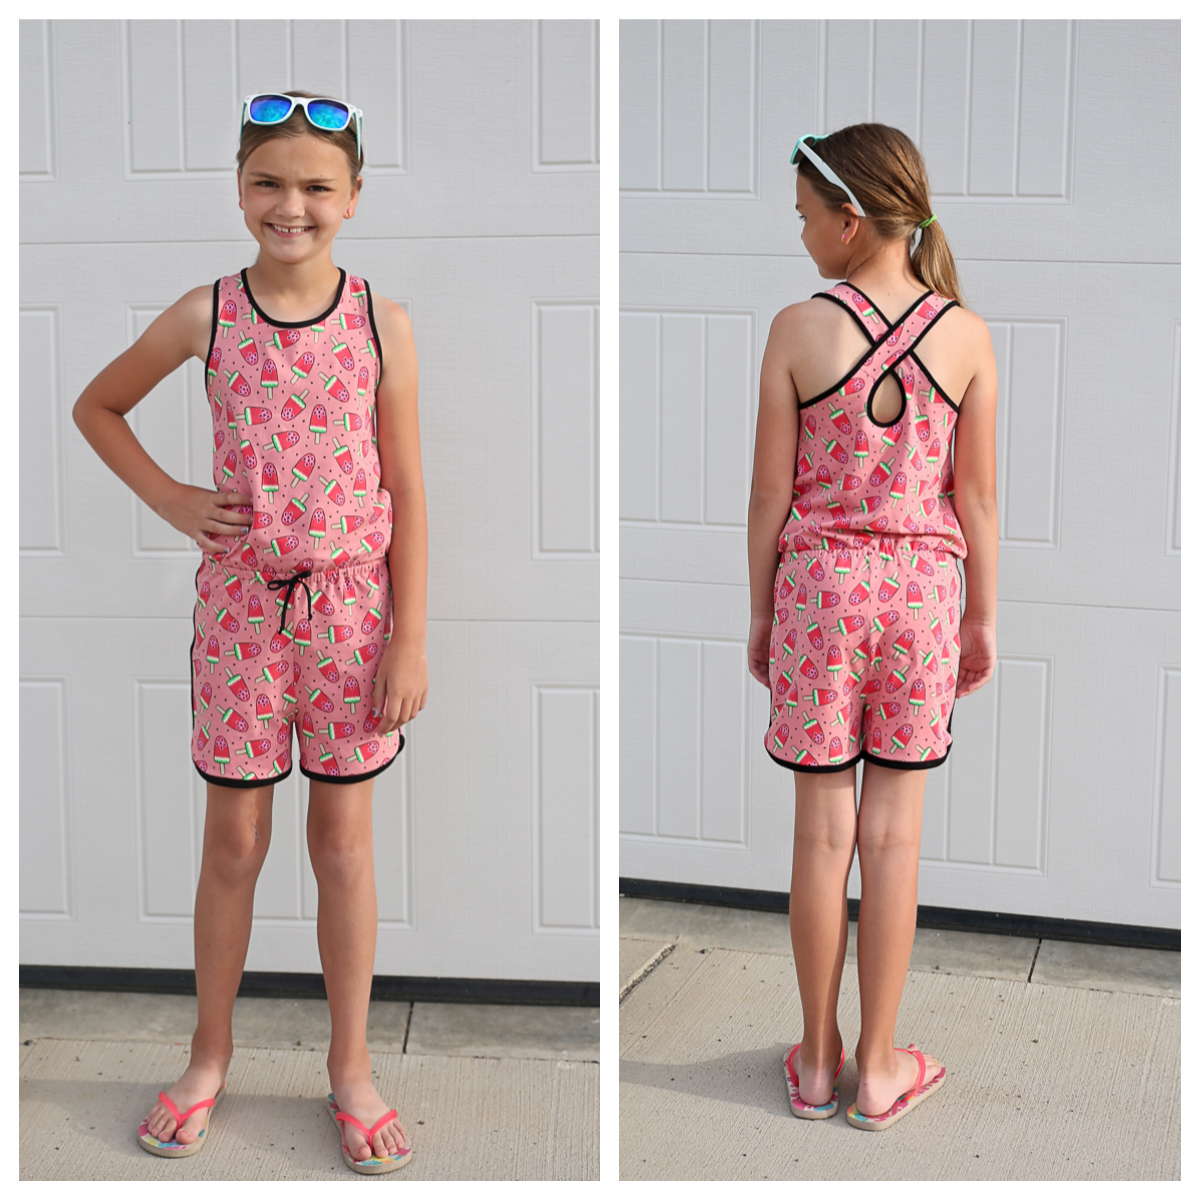 Susie Q's Ruffled Tank Top and Dress Sizes 2T to 14 Kids PDF Sewing Pattern